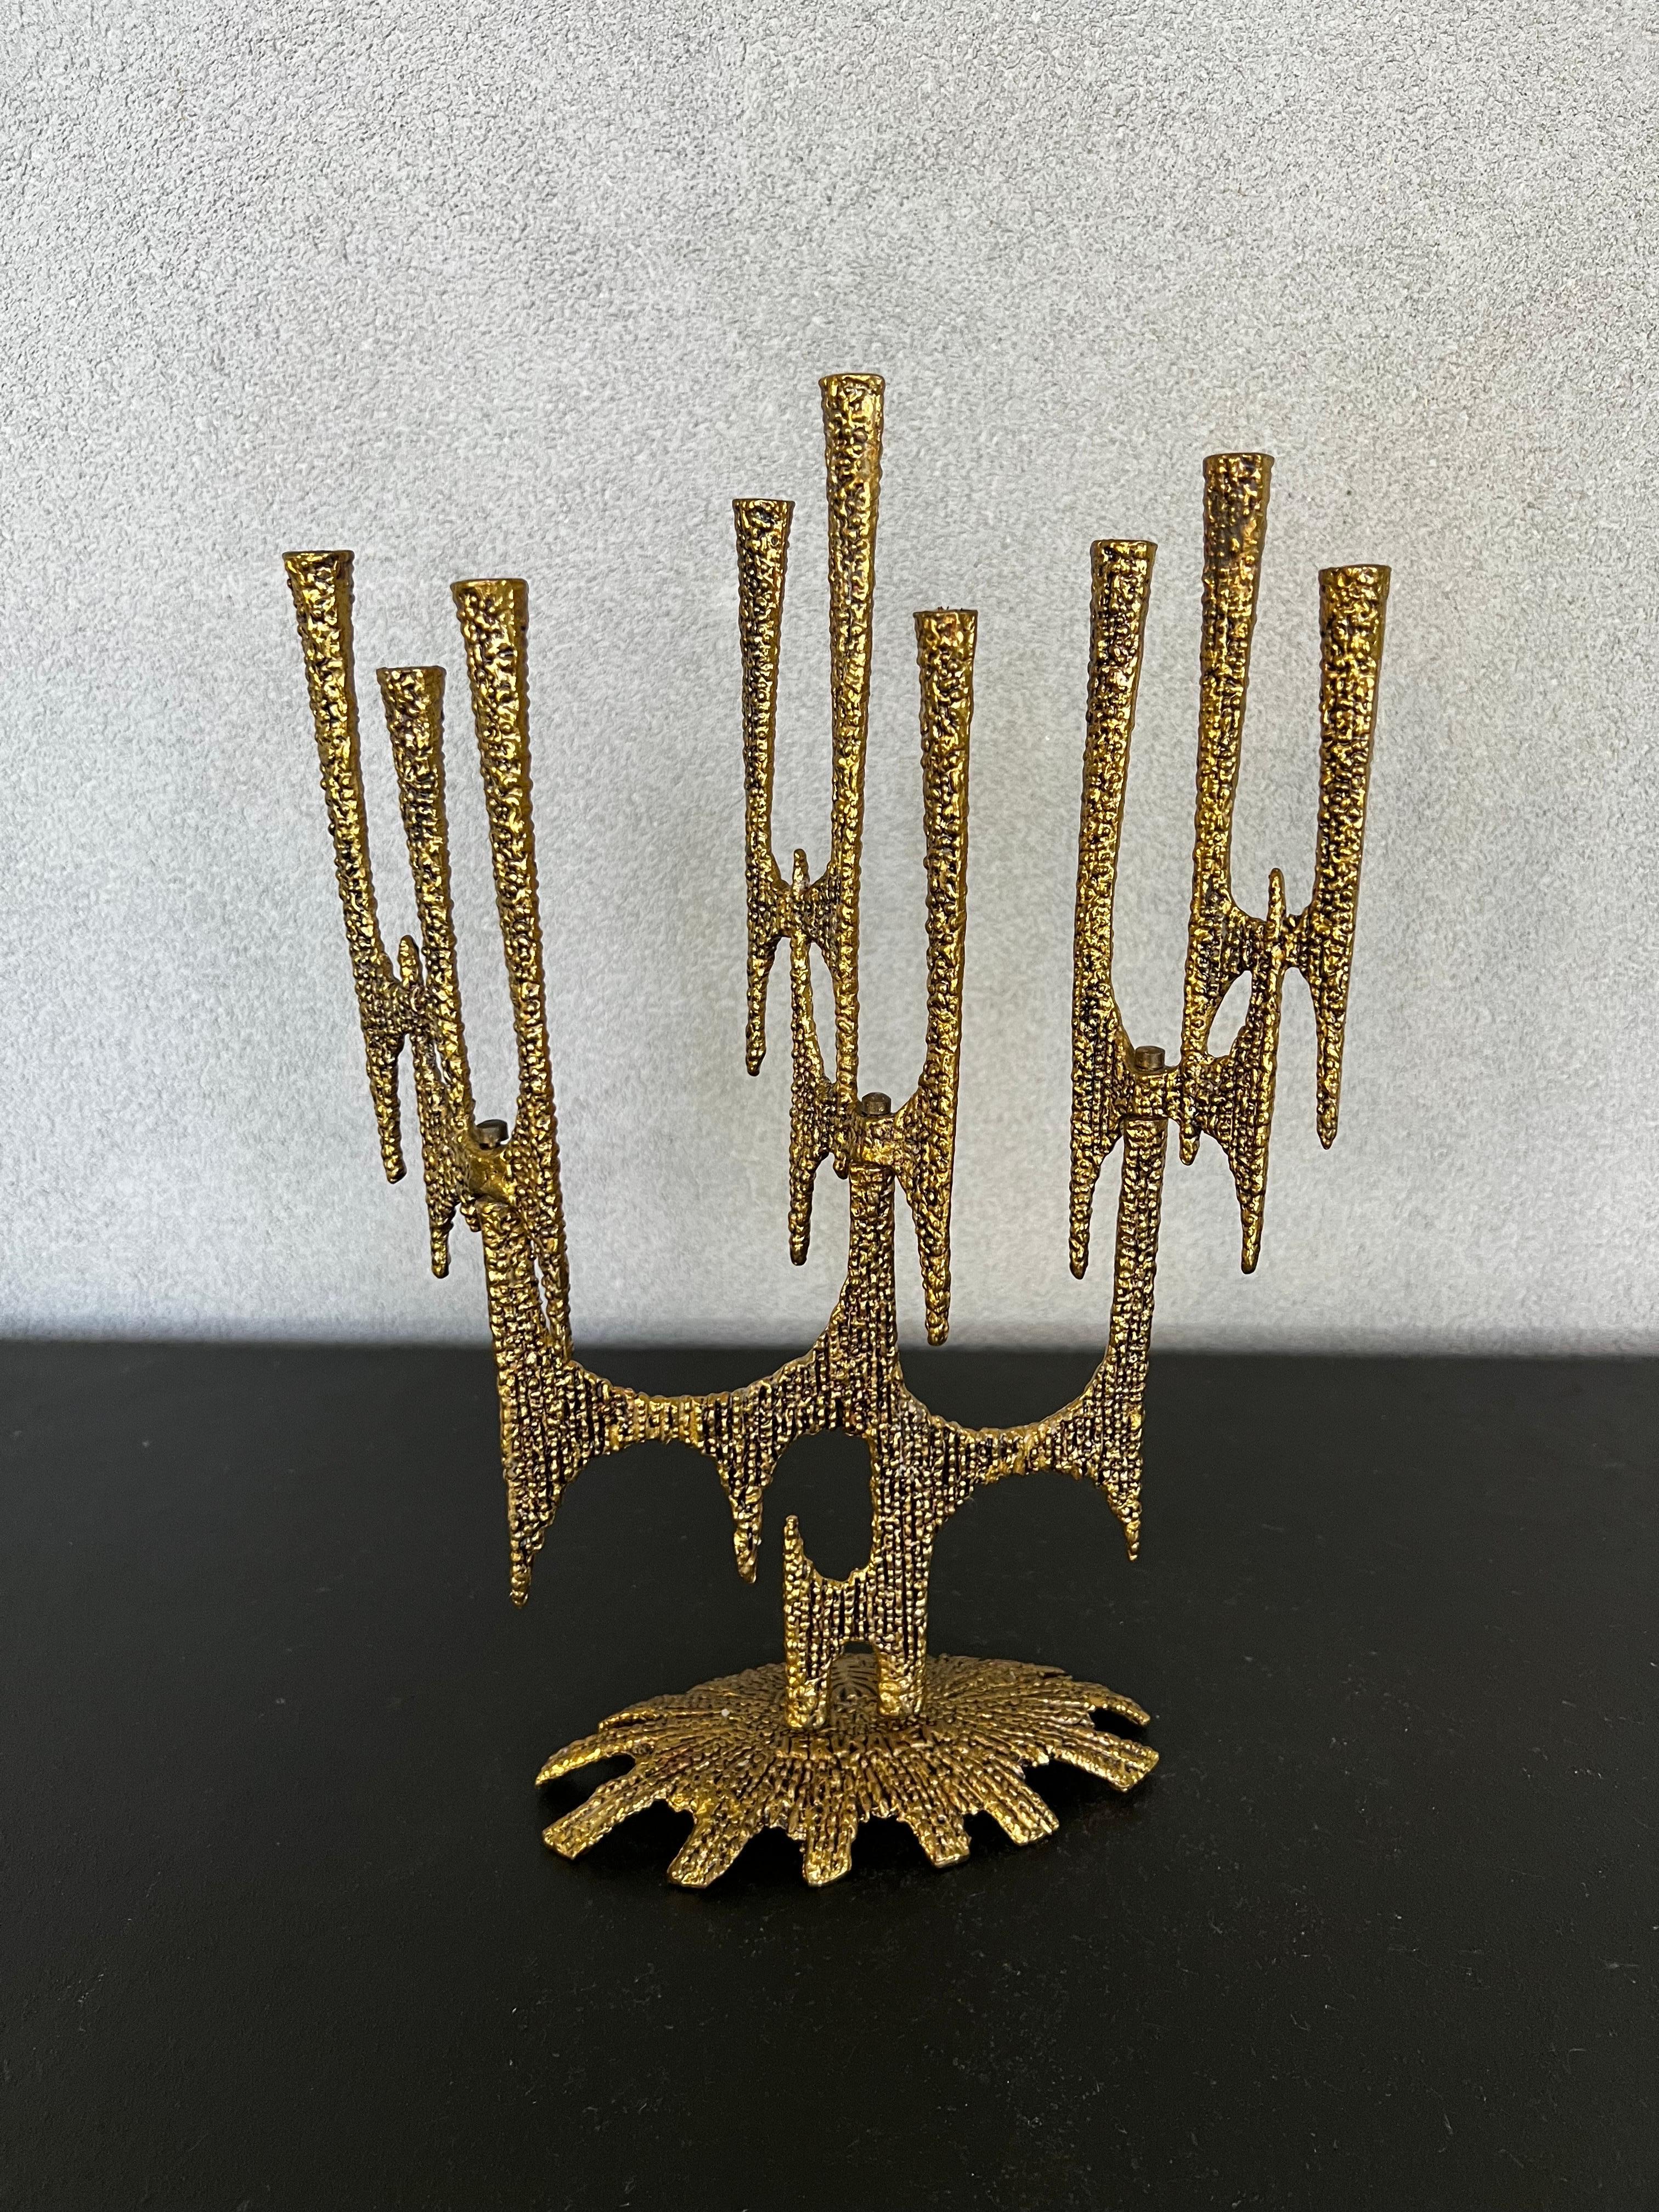 Stunning 1960’s Brutalist menorah handcrafted in brass in Israel. Features a beaded texture along the surface has a drawing of a Menorah and the word “Jerusalem” at the base and nine candleholders which rotate along the articulating stems, designed